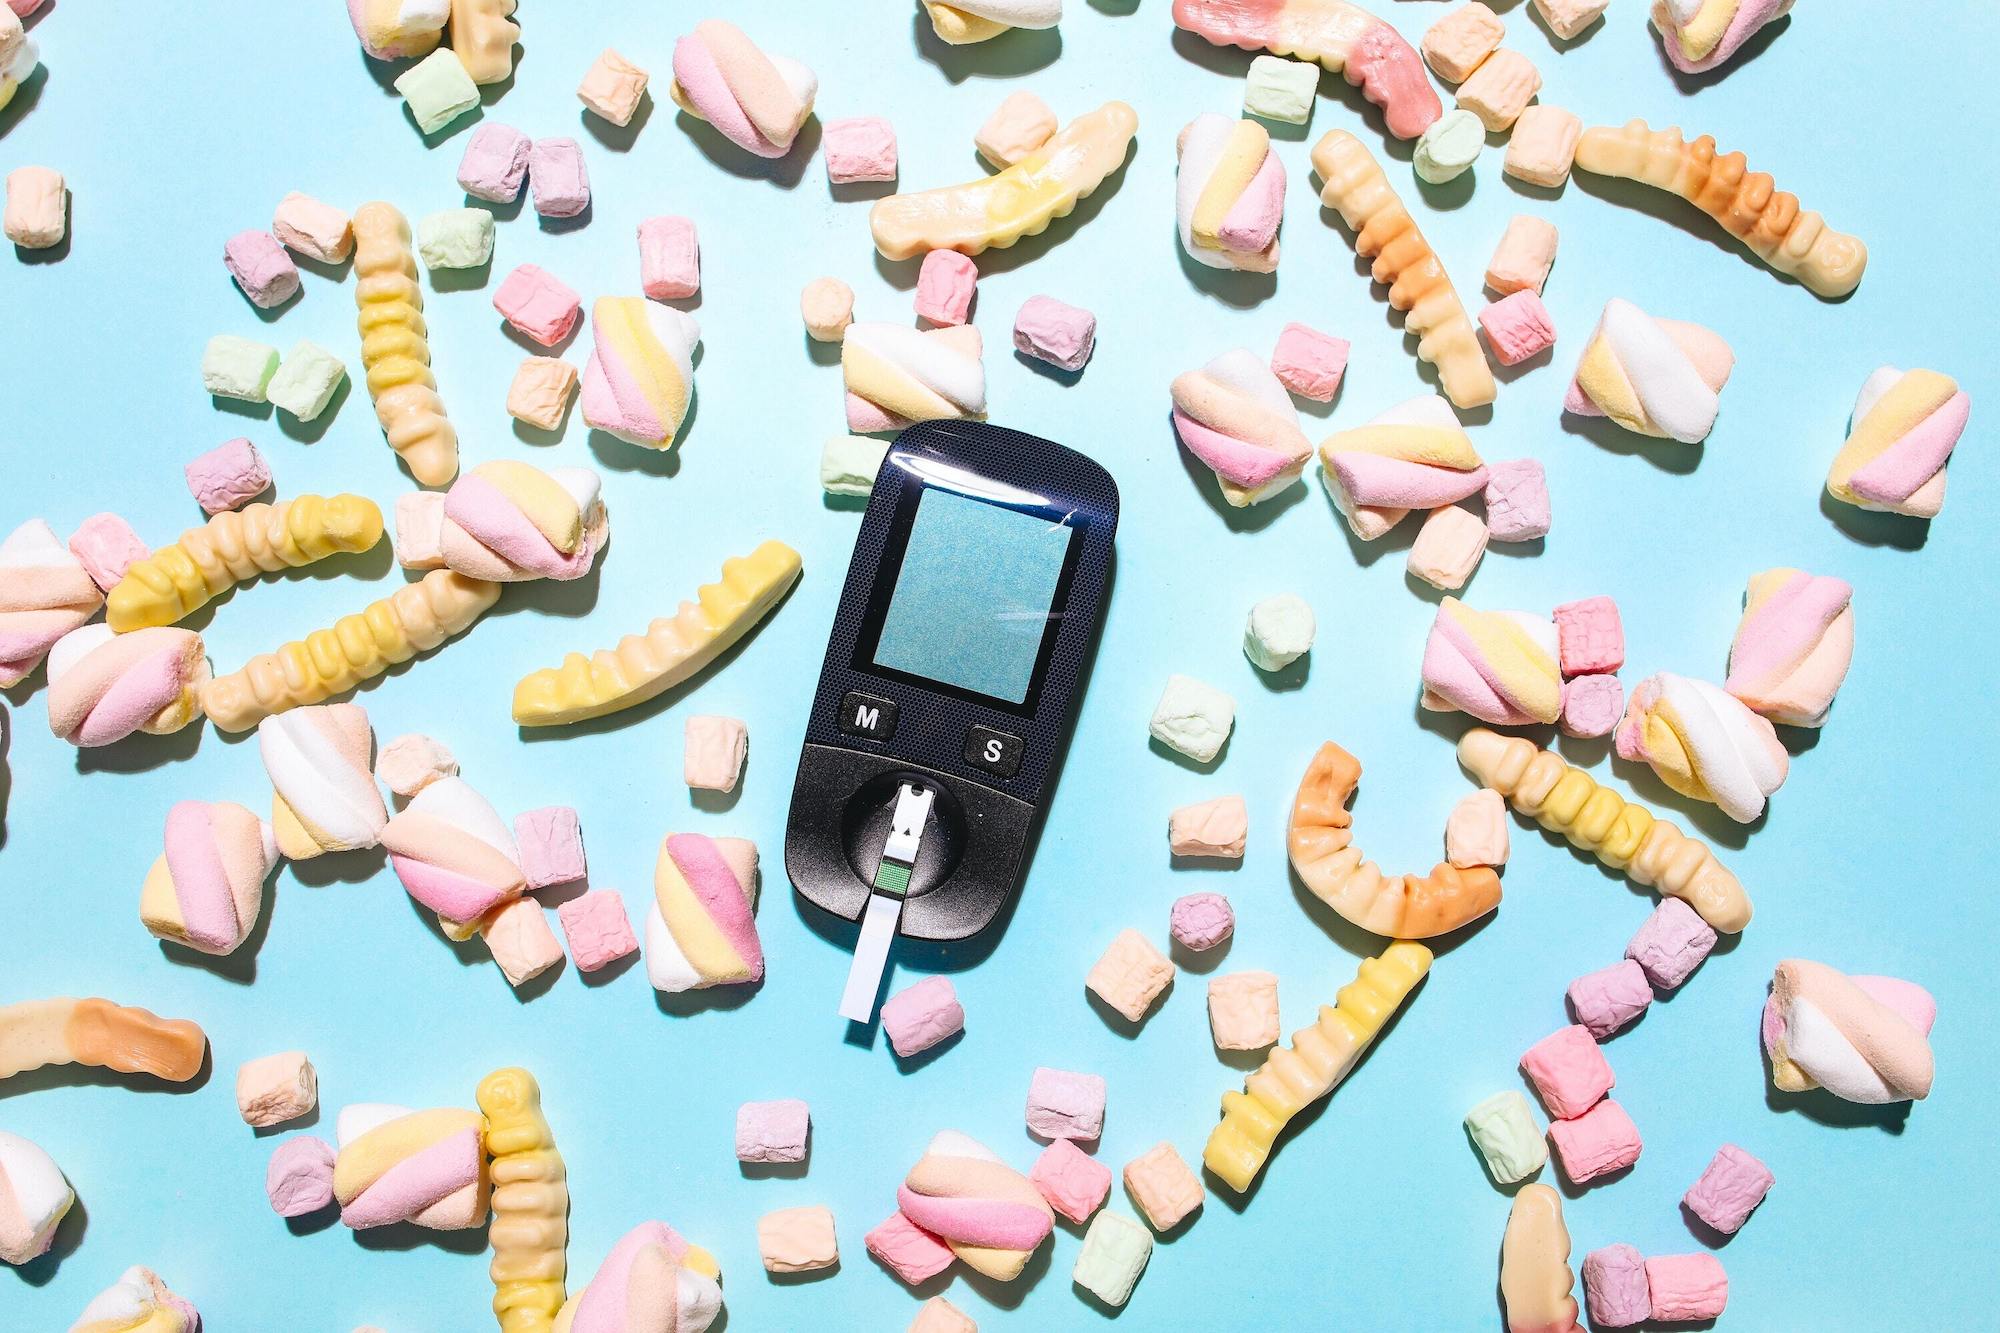 At 10.8%, the United States Has the Highest Percentage of Diabetics in its Population